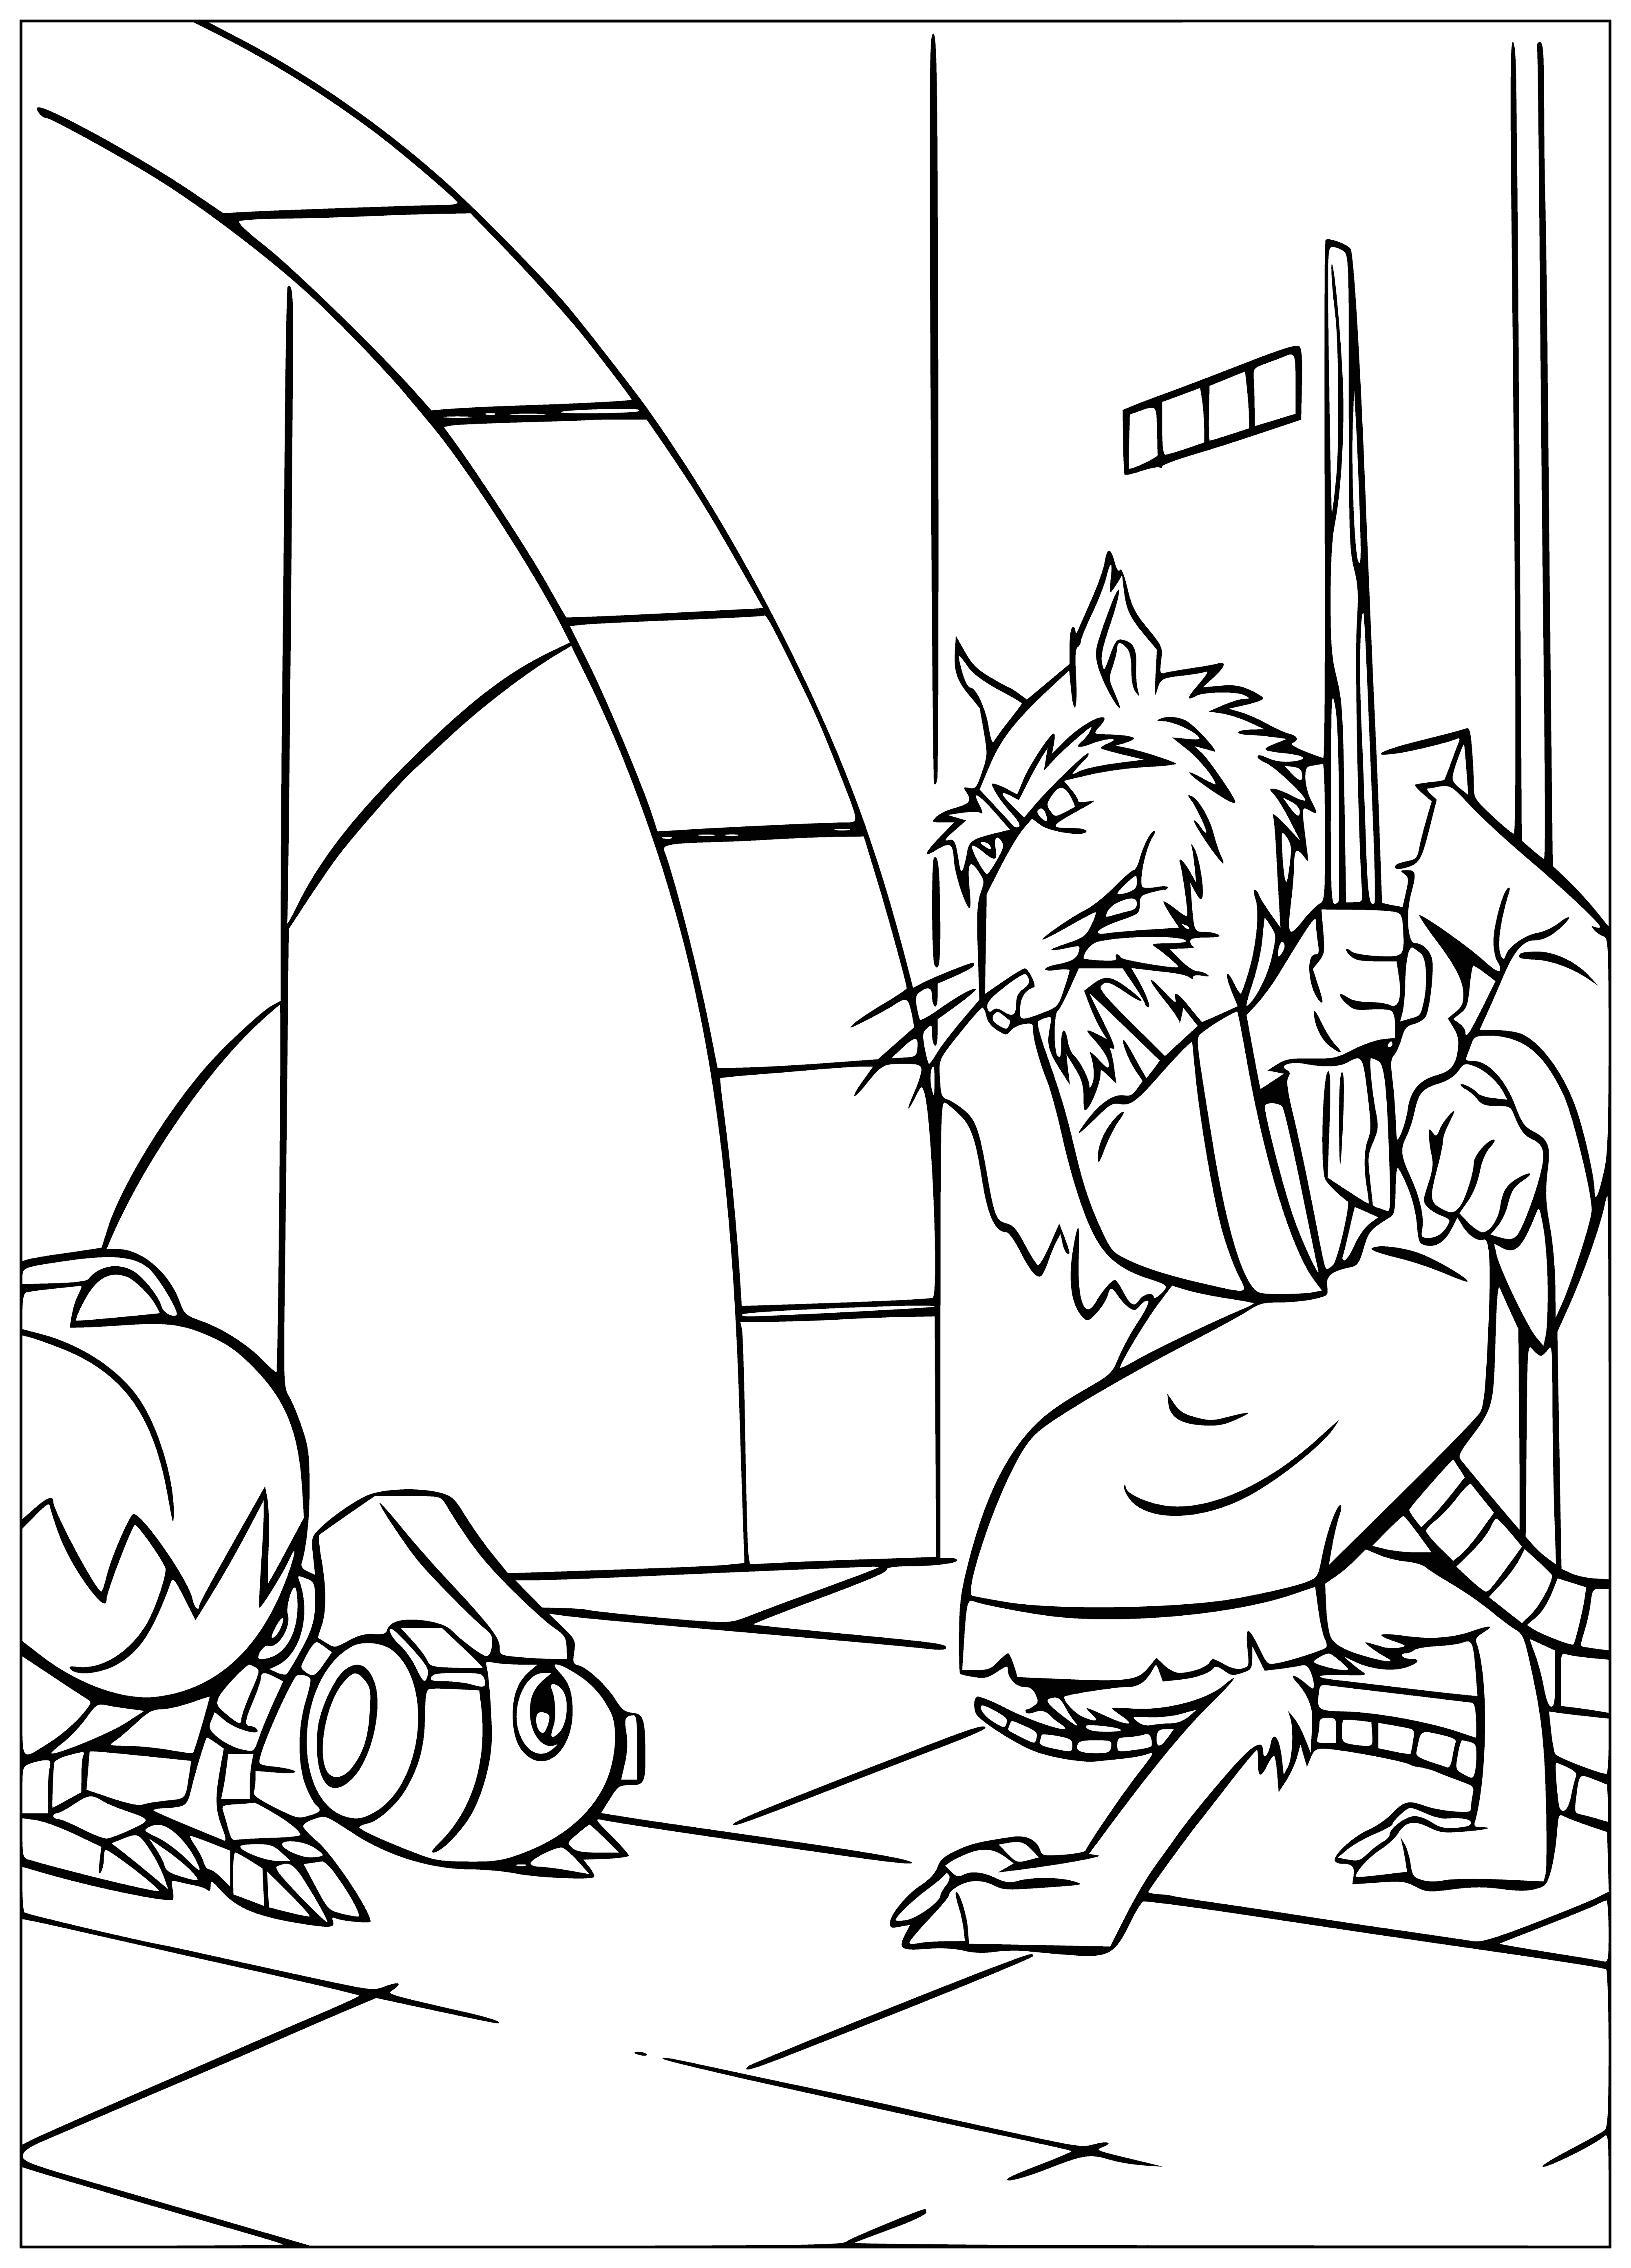 Splinter and robot coloring page